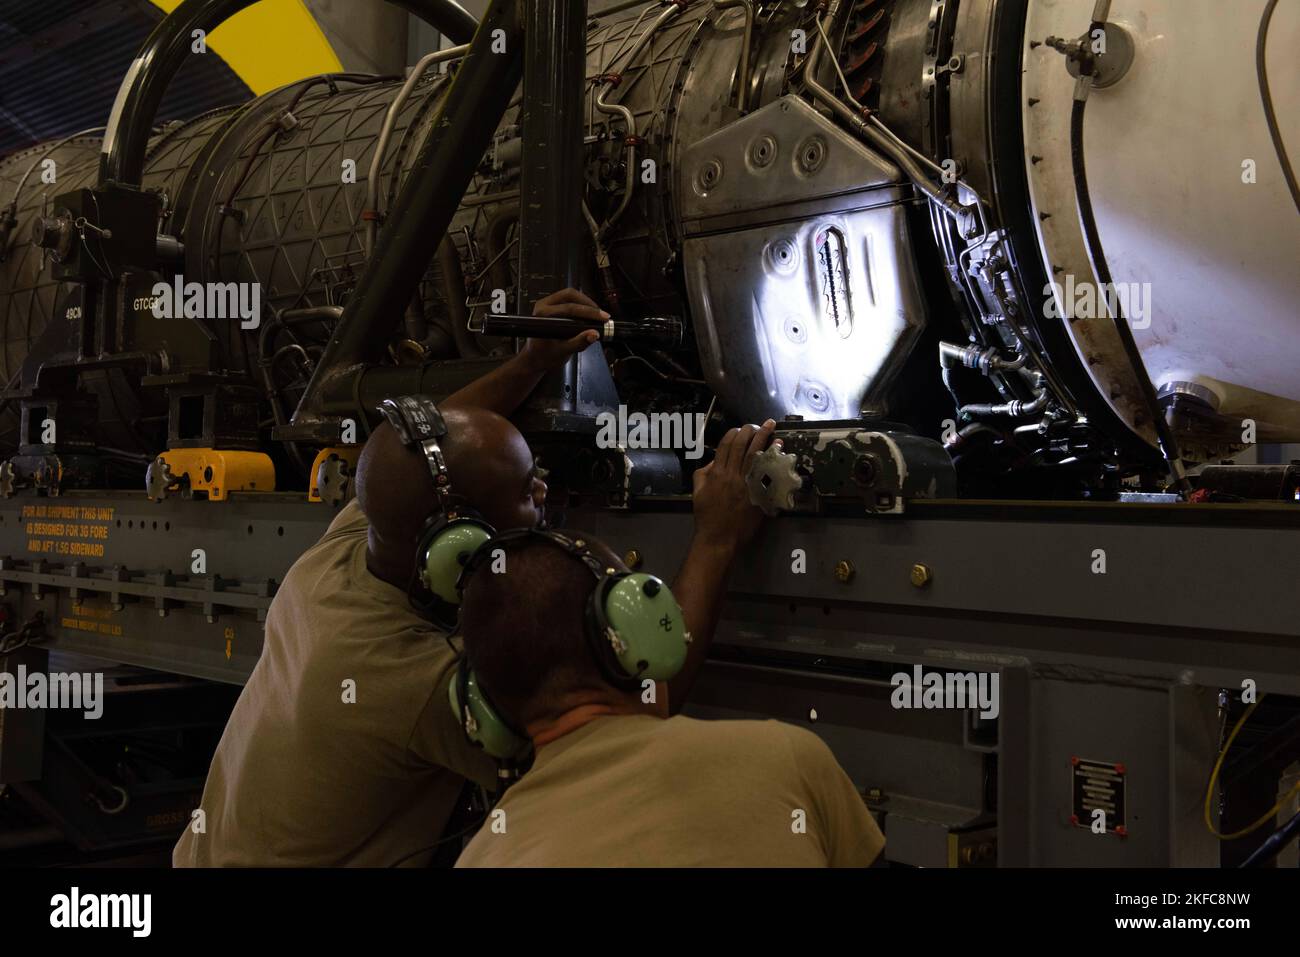 U.S. Air Force Staff Sgt. Samuel Berry, 49th Component Maintenance Squadron test cell craftsman, and Senior Airman Alex Turnage, 49th Component Maintenance Squadron aerospace propulsion journeyman, inspect the oil on a Pratt & Whitney F100 turbofan engine at Holloman Air Force Base, New Mexico, Sept. 6, 2022. The 49th CMS is composed of more than 190 personnel charged with providing top-tier engines that keep Holloman's F-16 Viper pilots in the air. Stock Photo